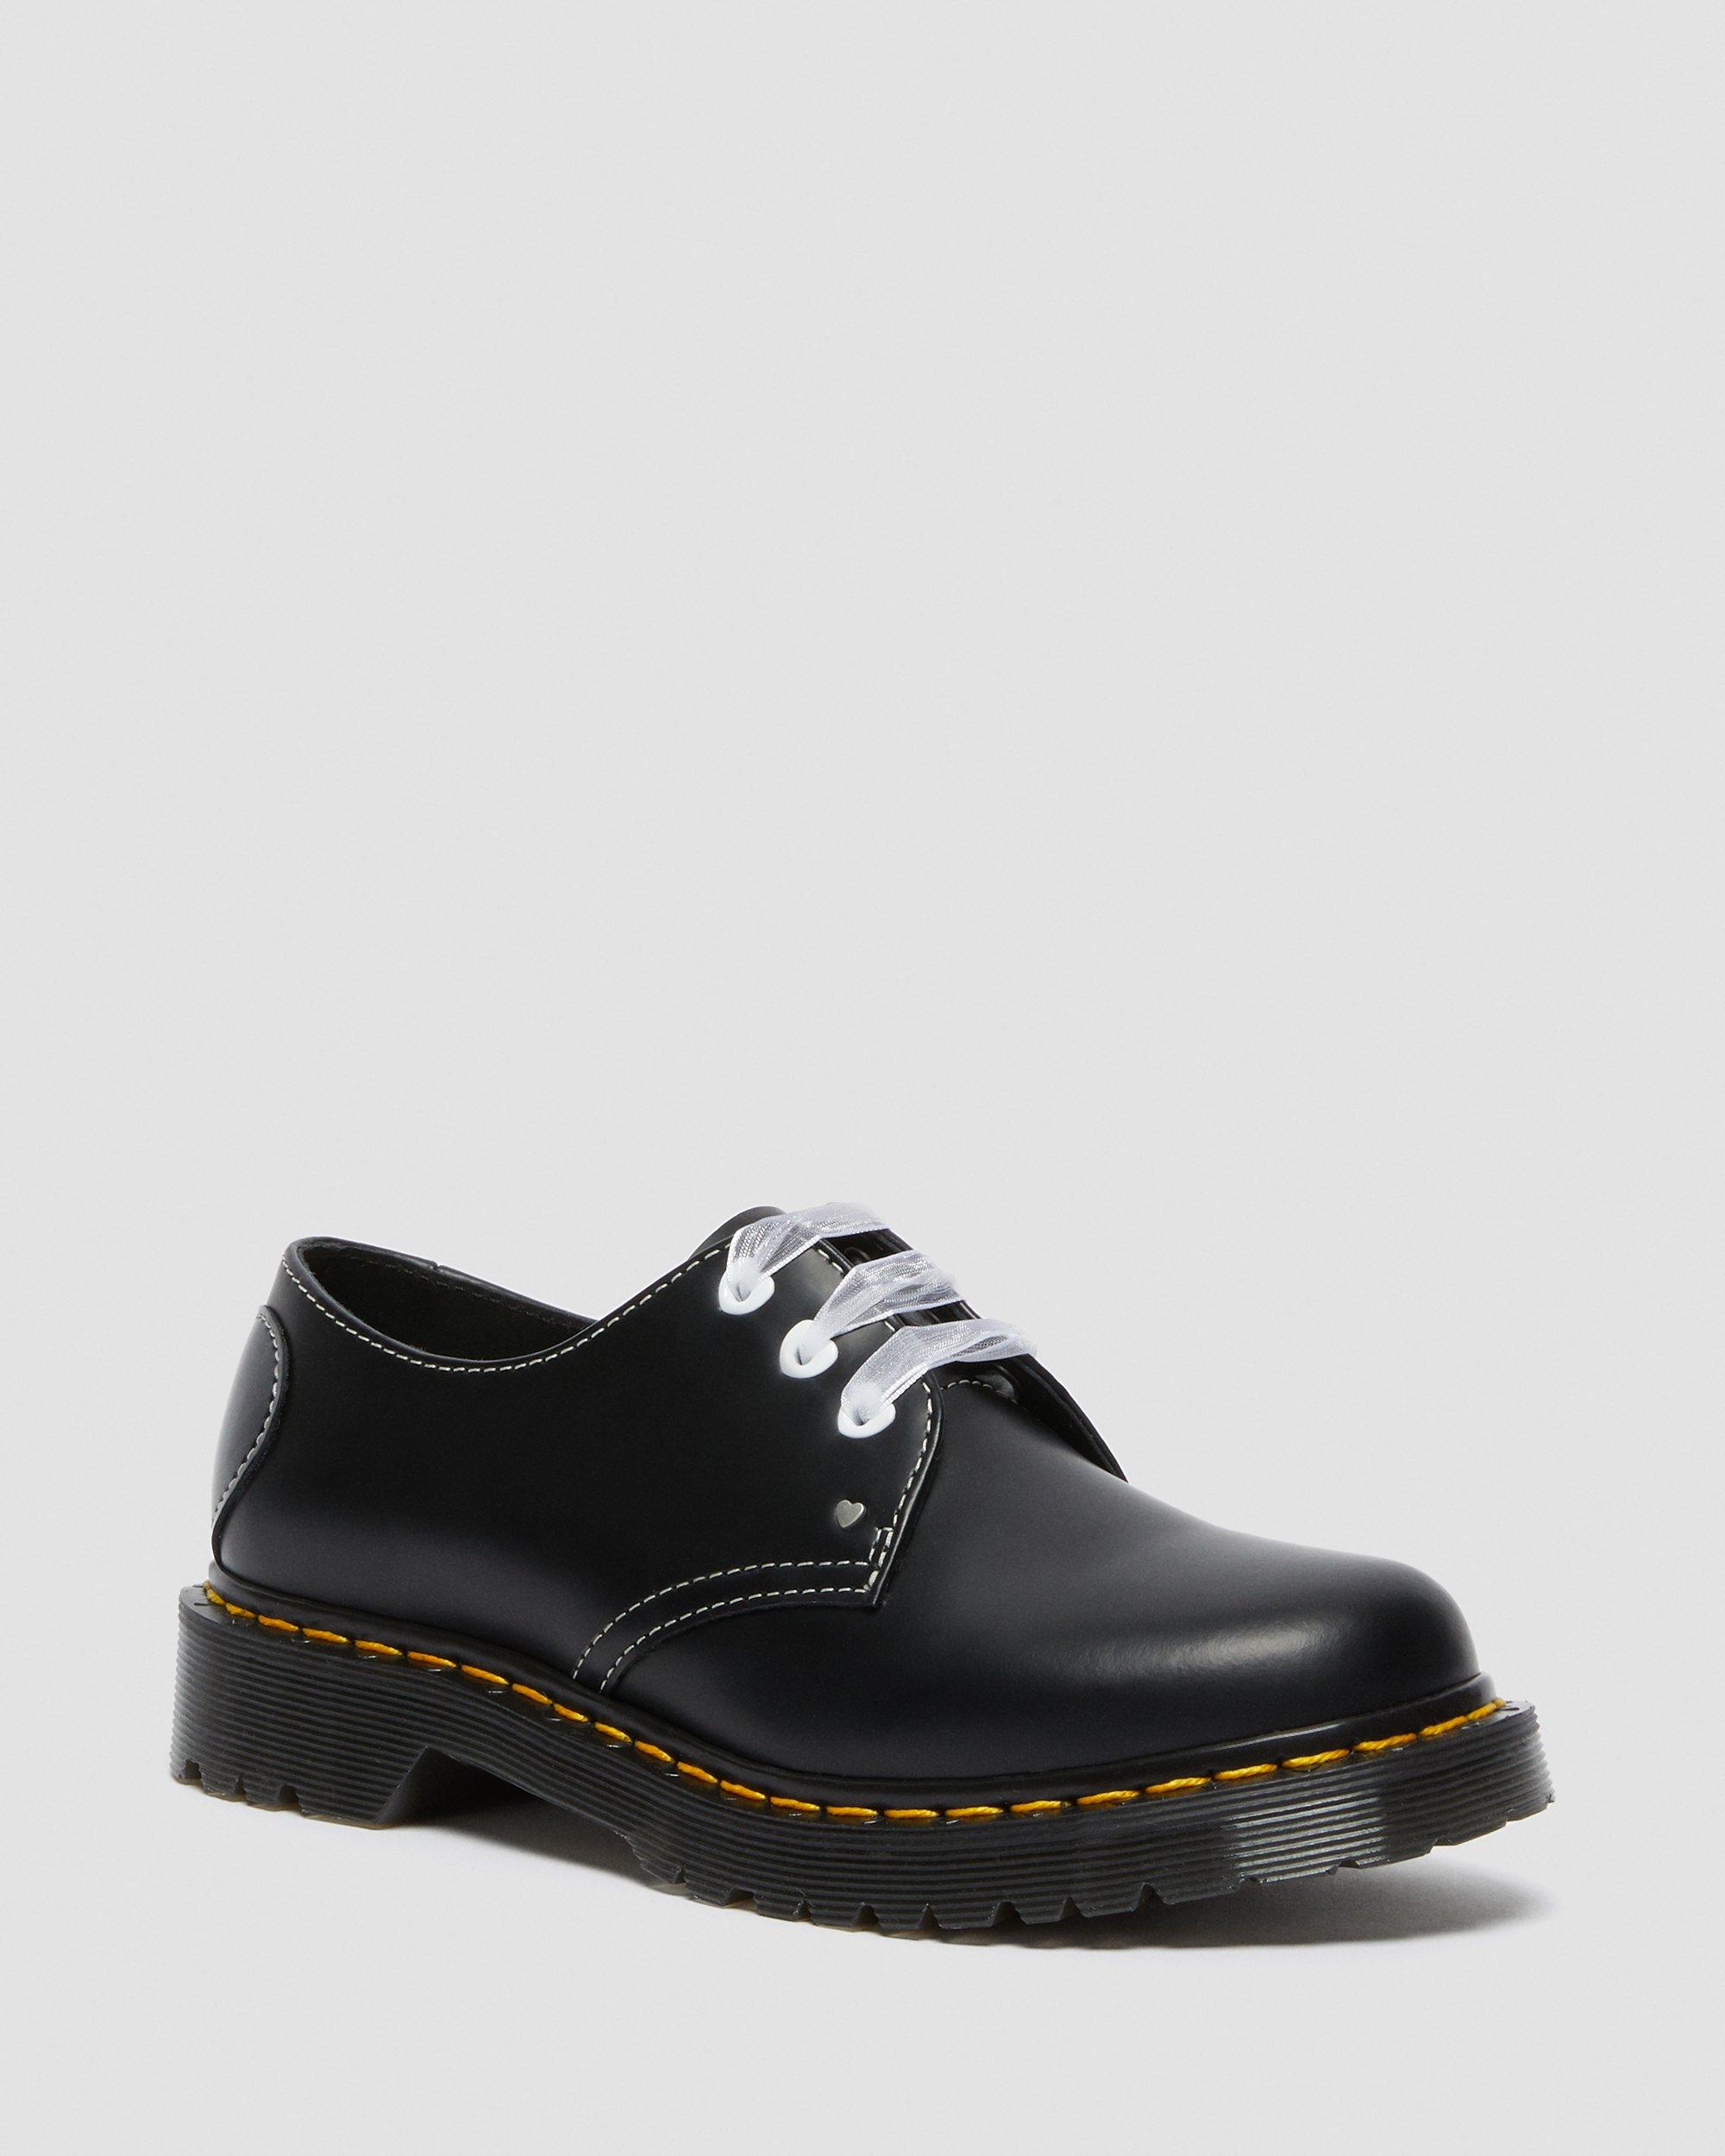 1461 Hearts Smooth & Patent Leather Oxford Shoes | Dr. Martens